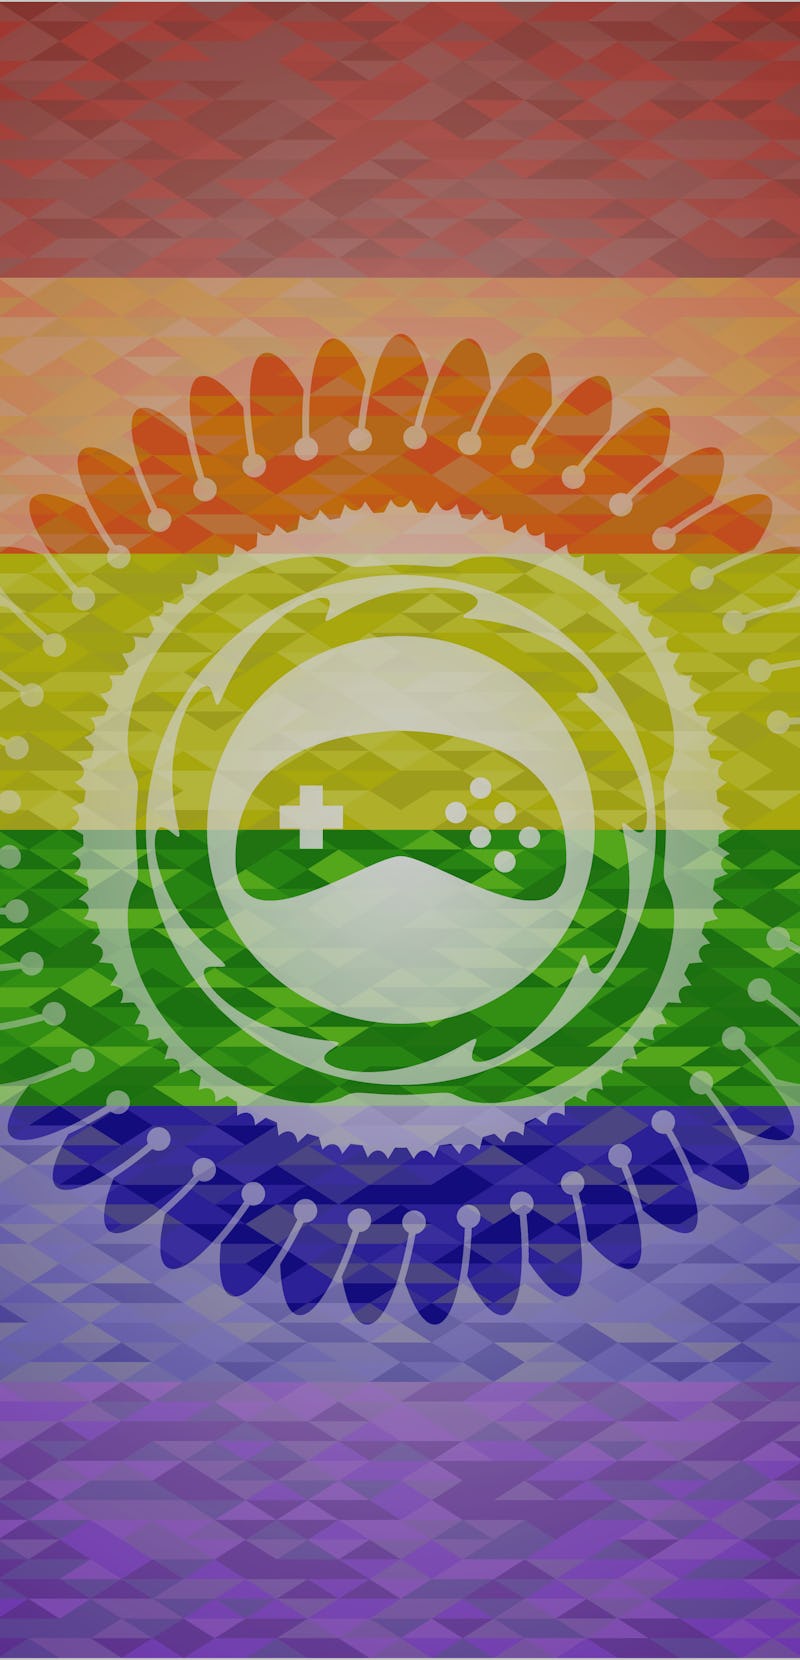 video game icon on mosaic background with the colors of the LGBT flag